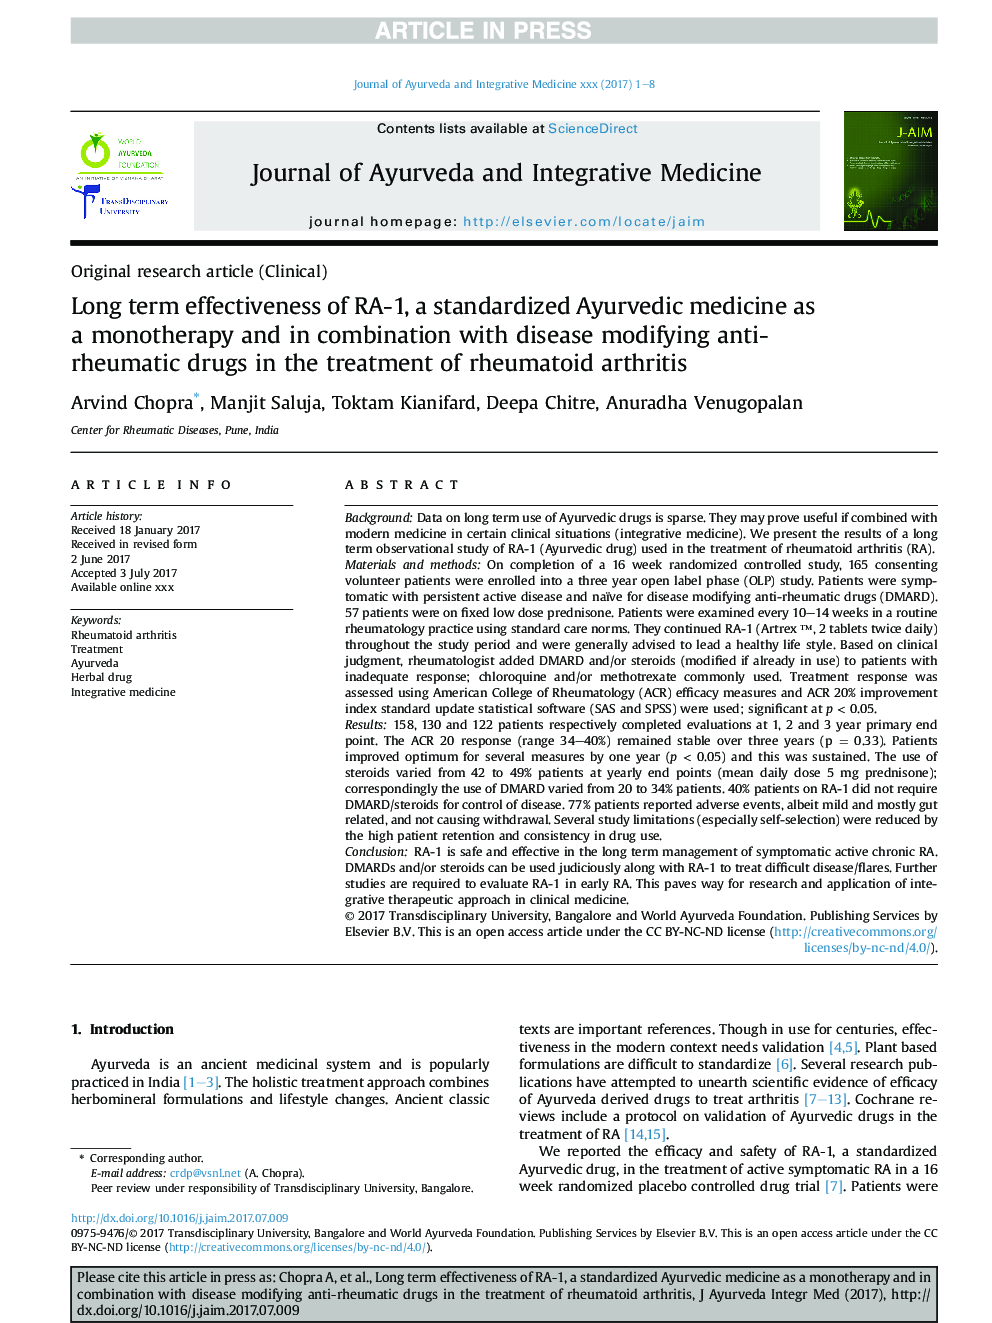 Long term effectiveness of RA-1 as a monotherapy and in combination with disease modifying anti-rheumatic drugs in the treatment of rheumatoid arthritis